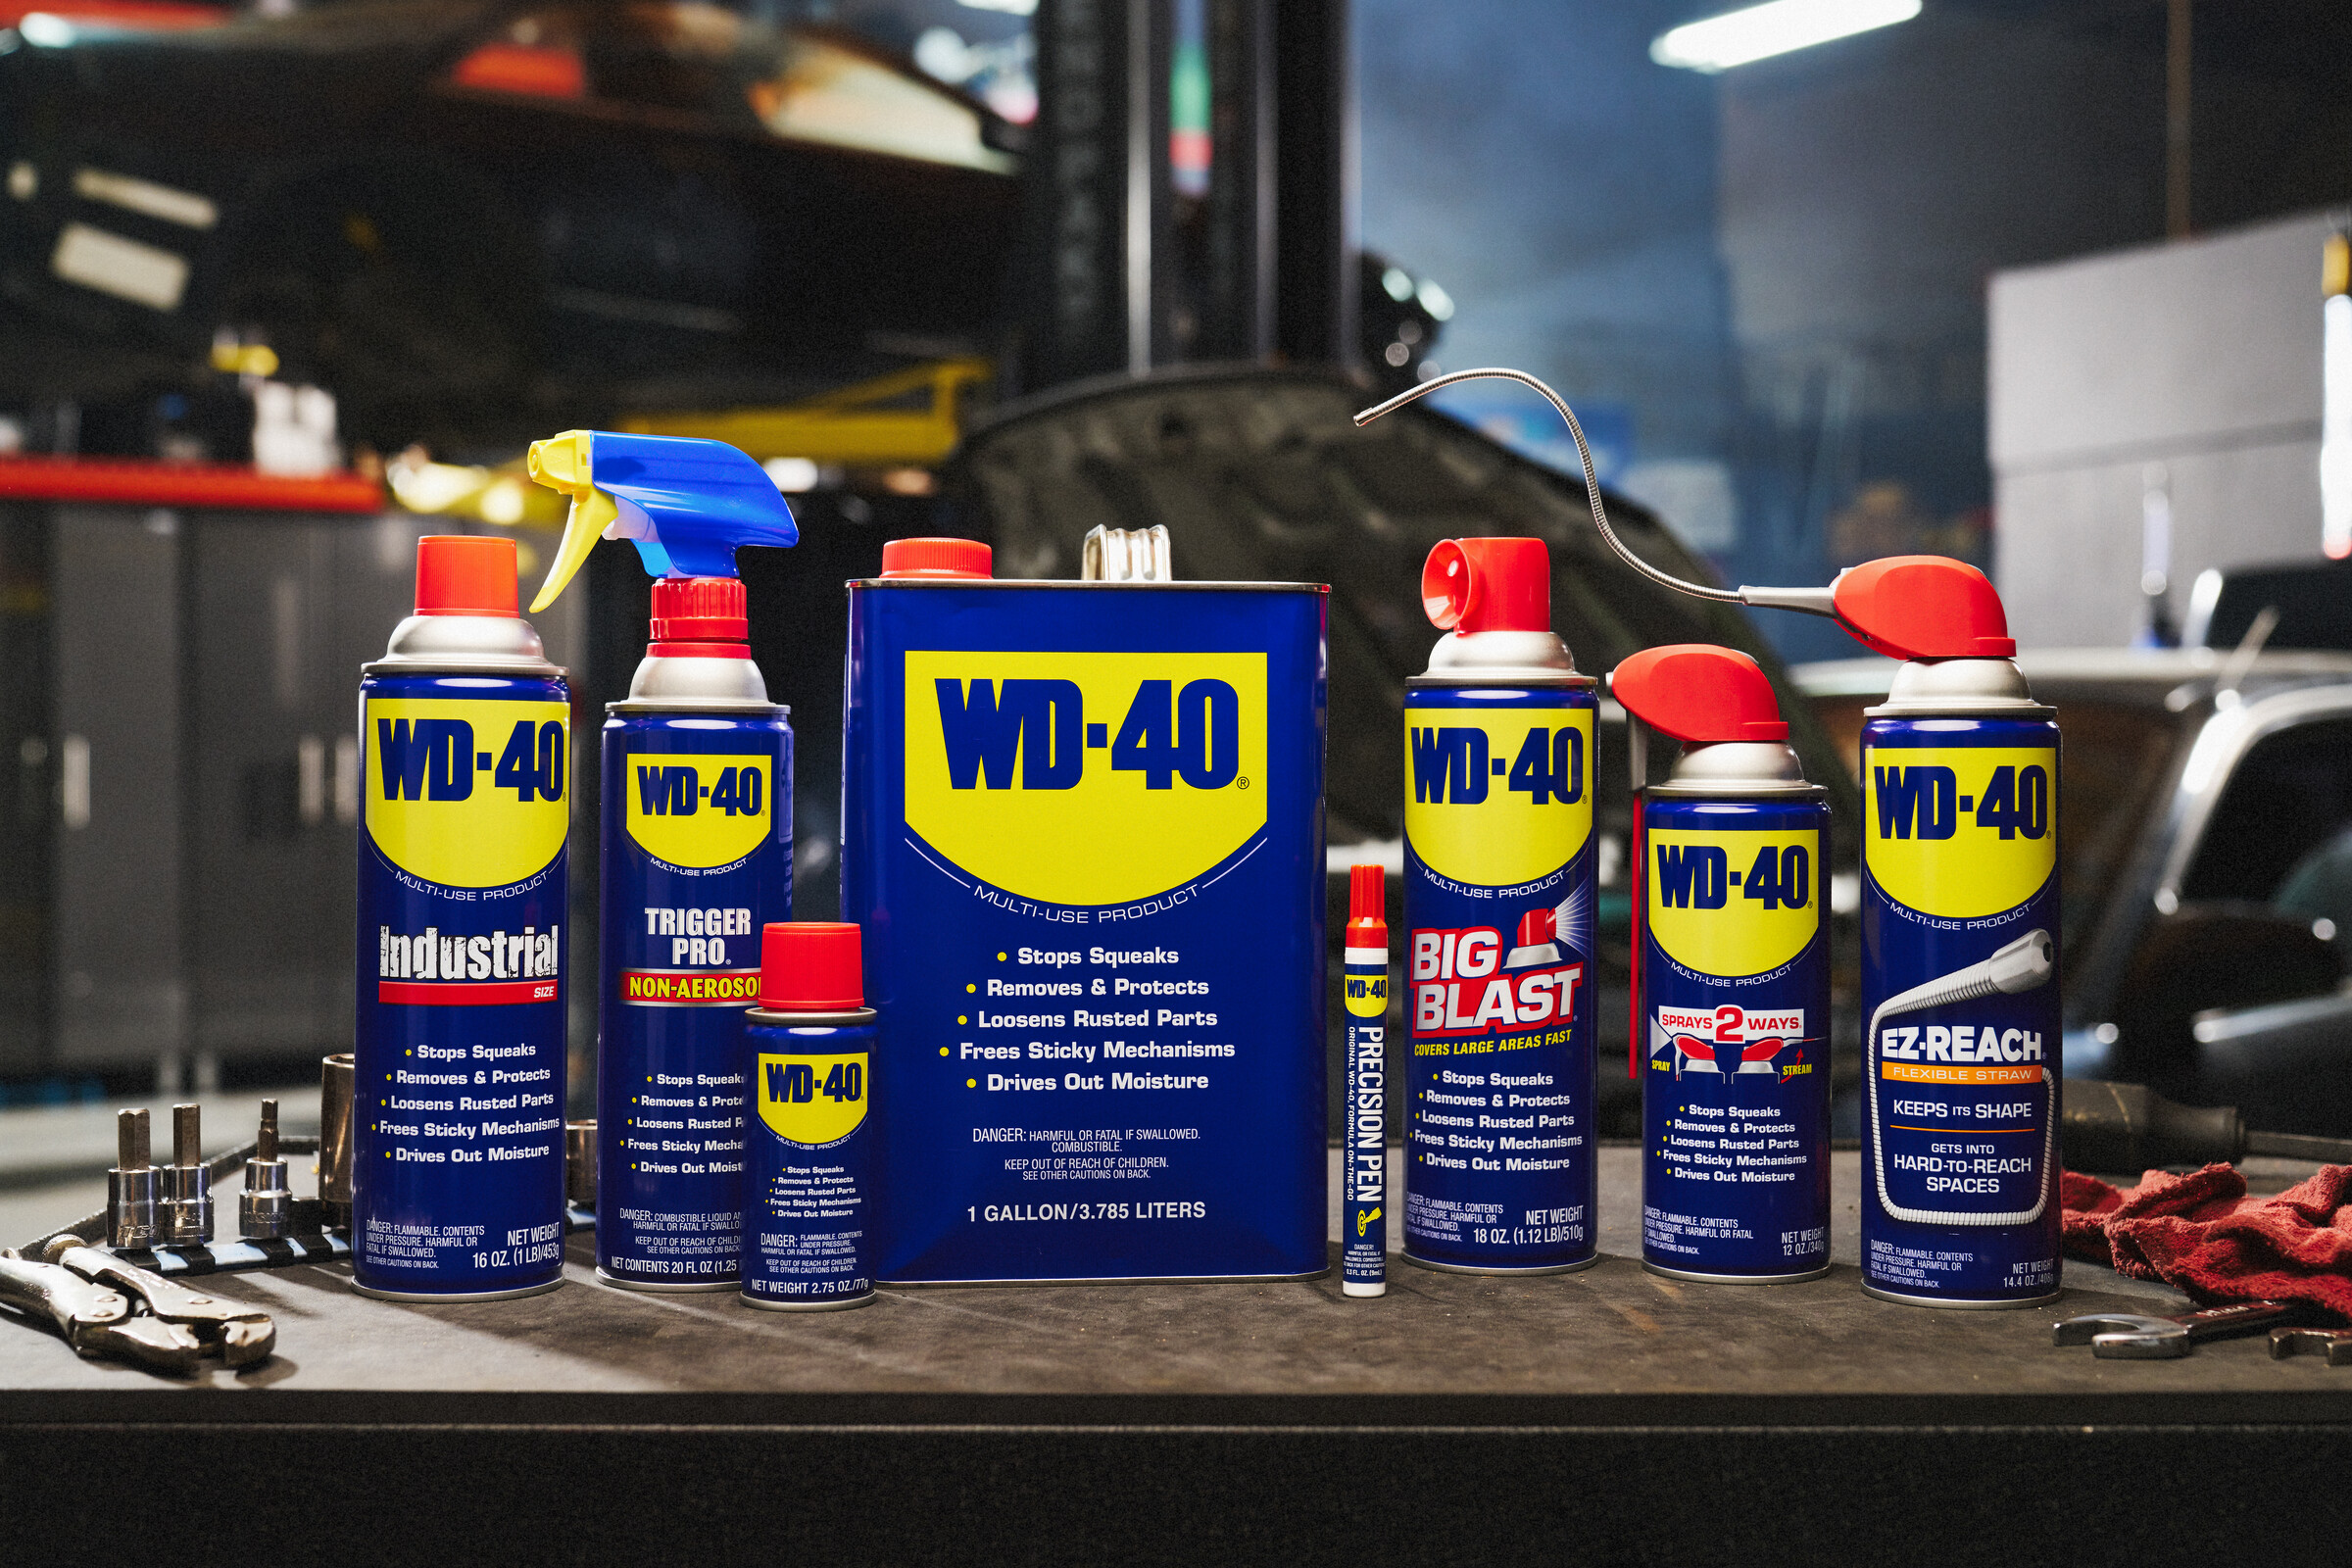 Carry WD-40® Precision Pen in Your Pocket for Whenever You Need It - Racer X